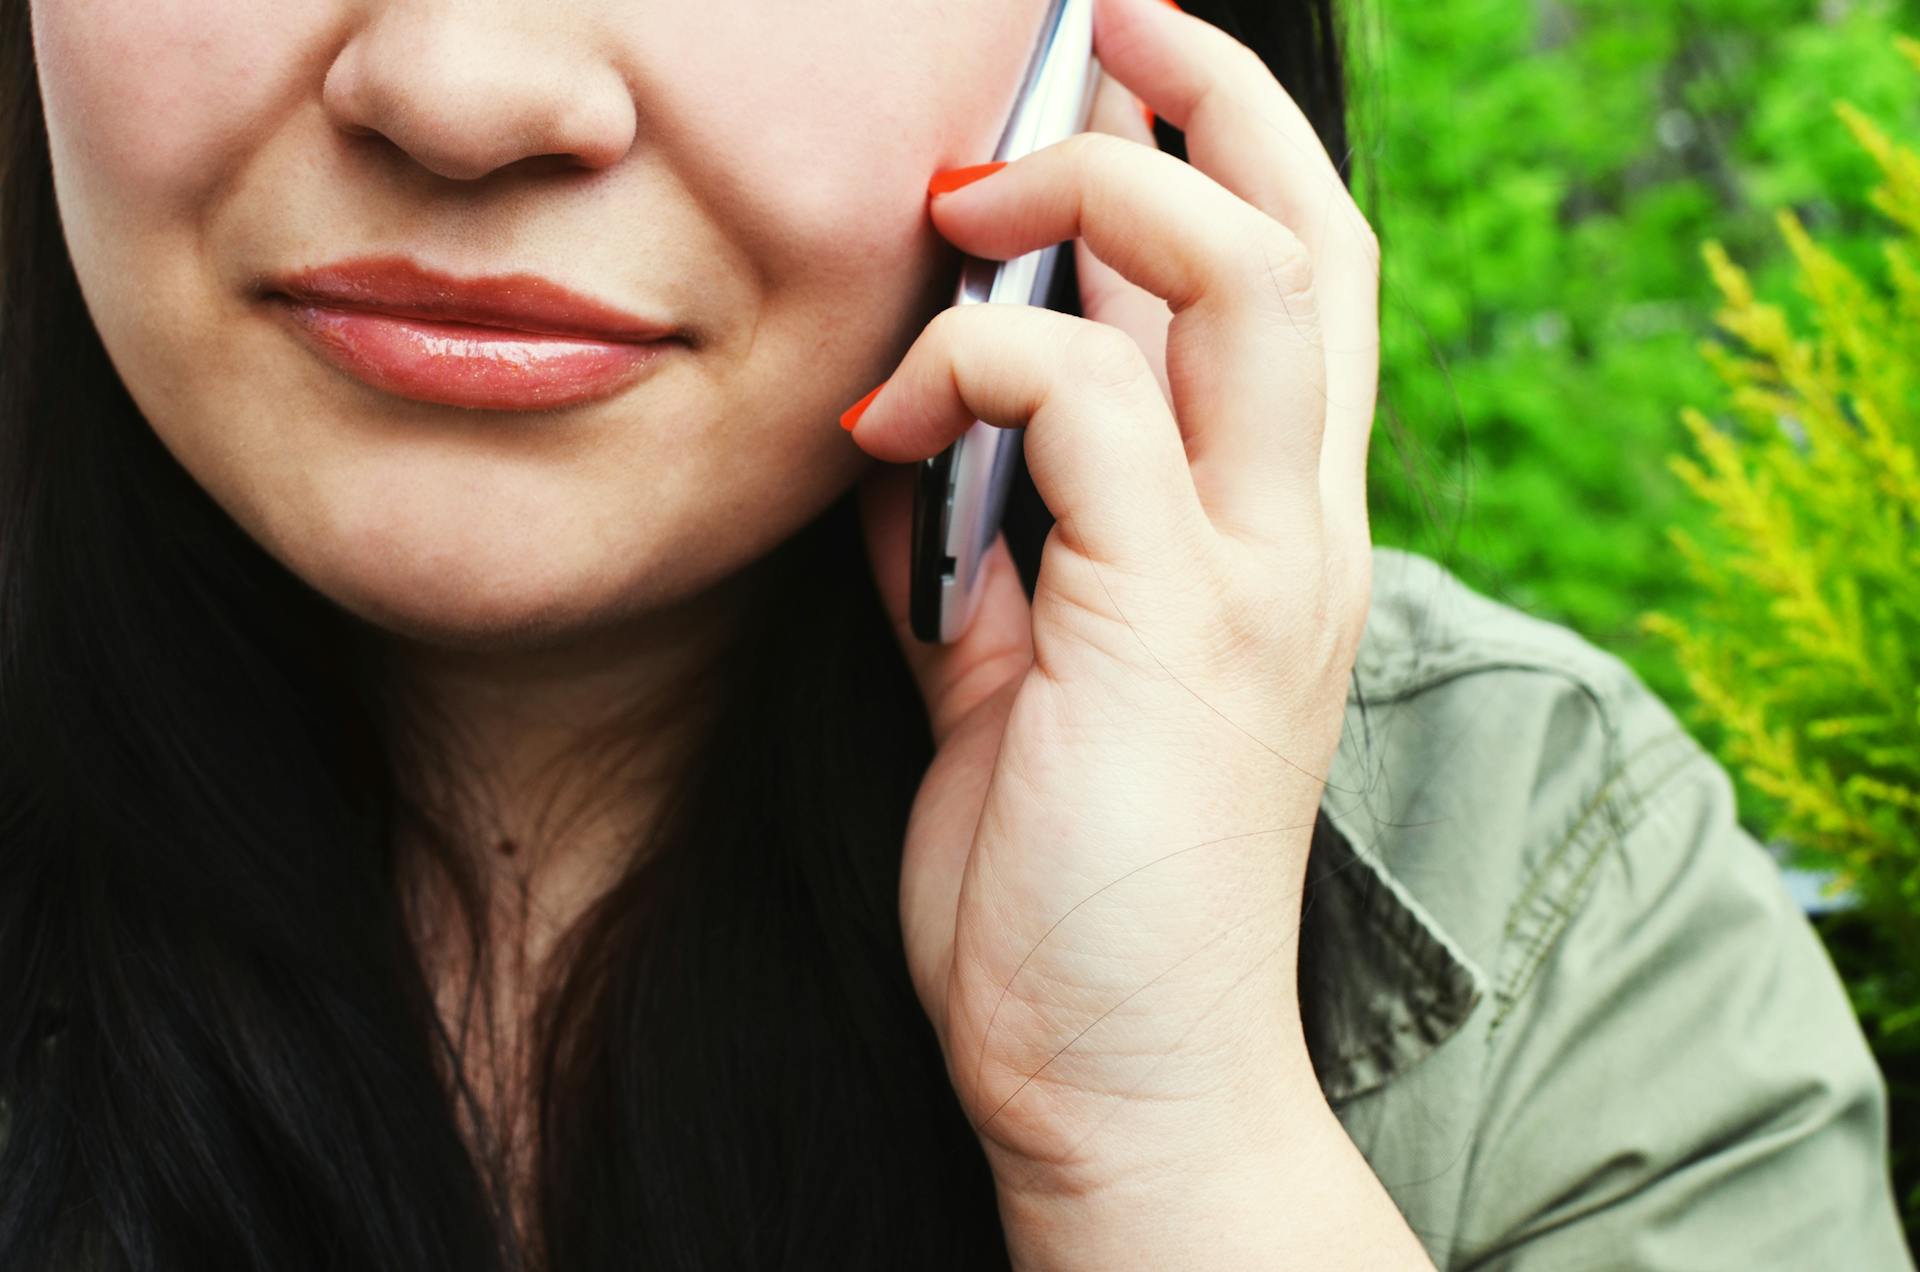 A close-up of a woman talking on the phone | Source: Pexels